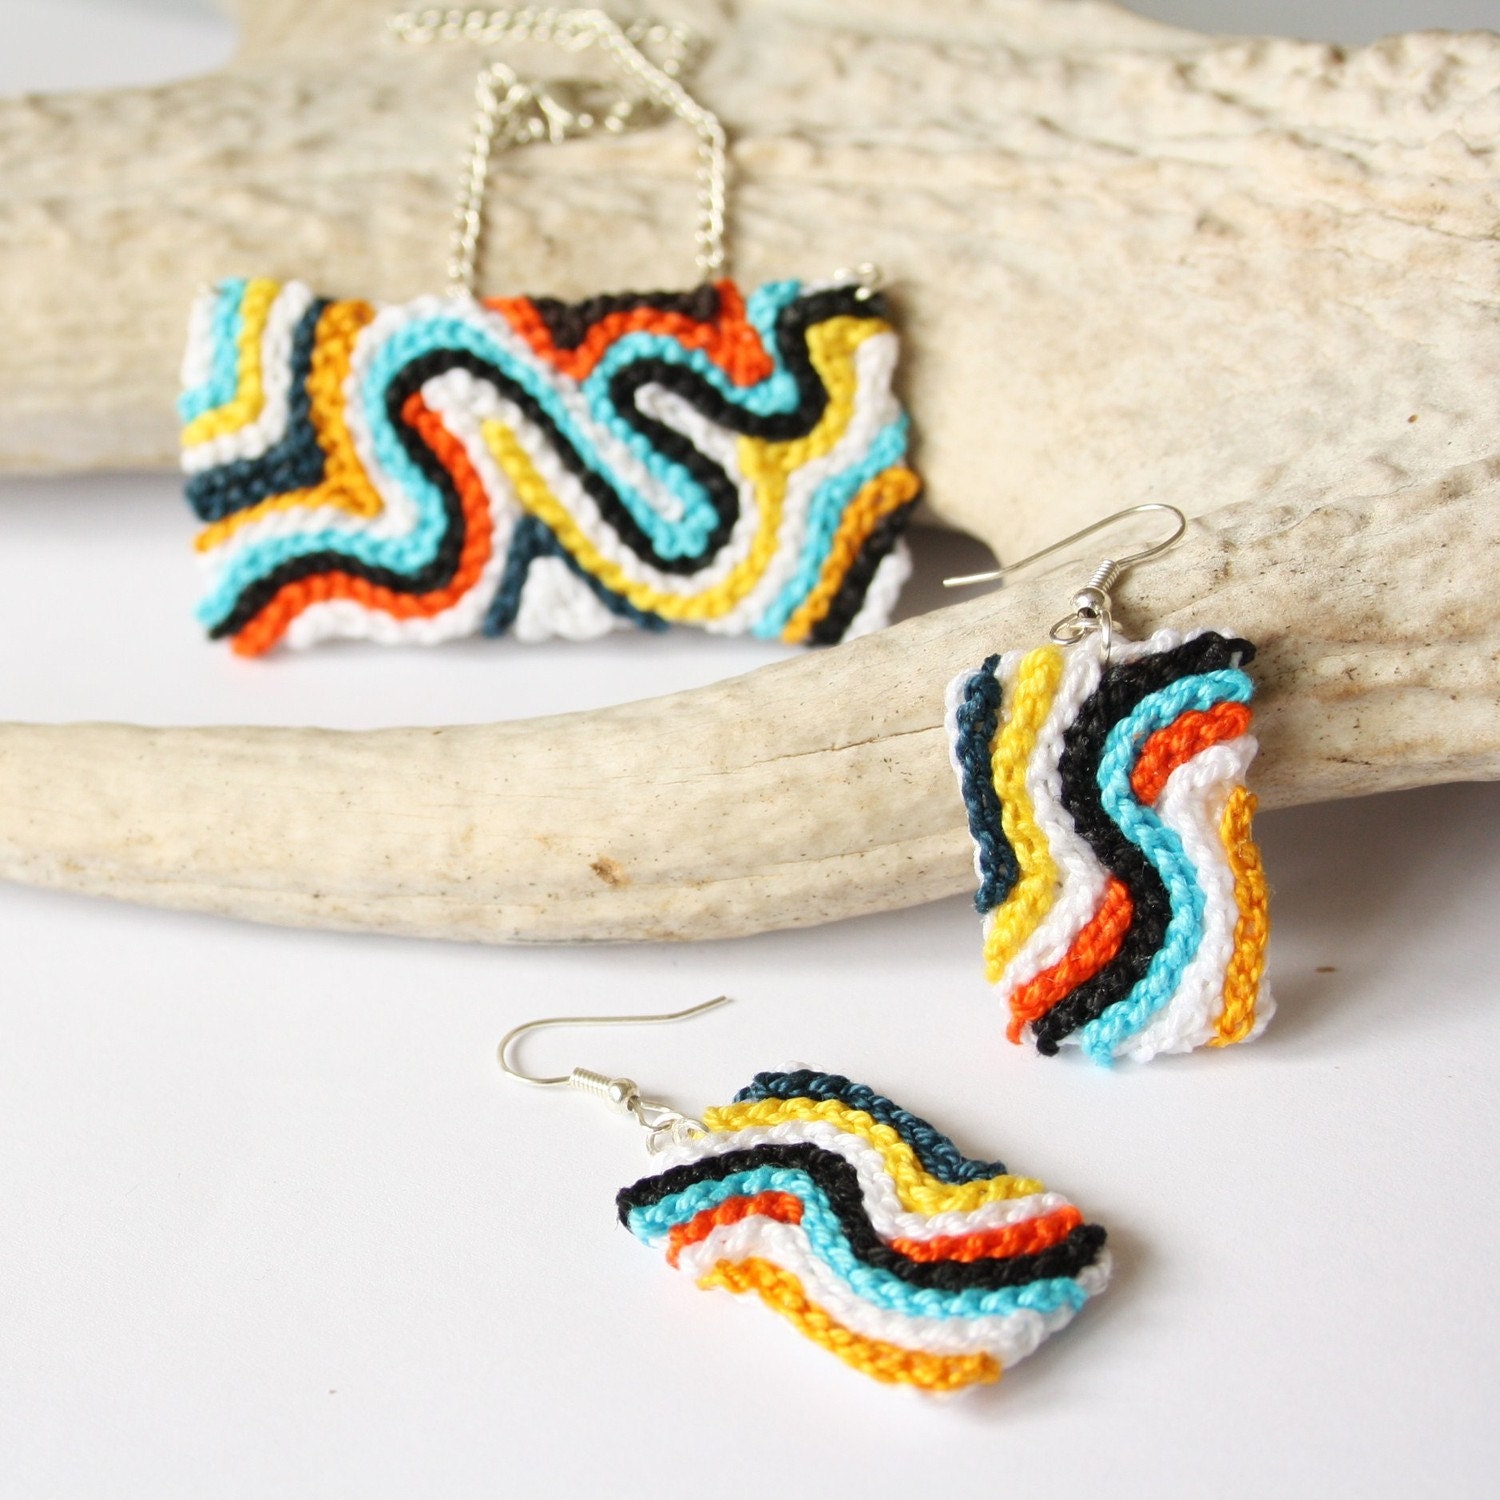 lines of the Painter - handmade crochet necklace